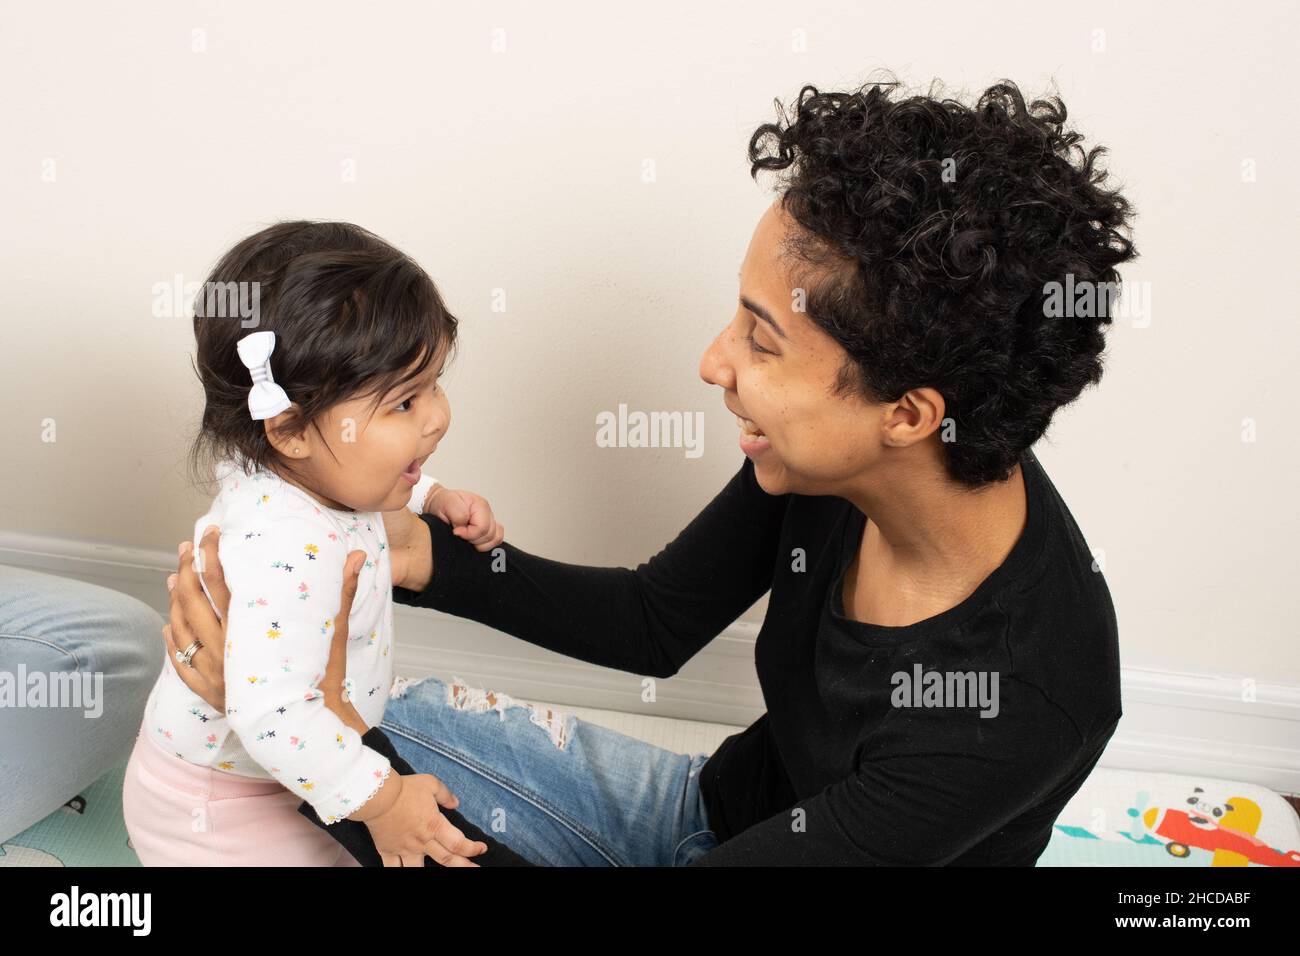 8 month old baby girl smiling interaction with mother Stock Photo